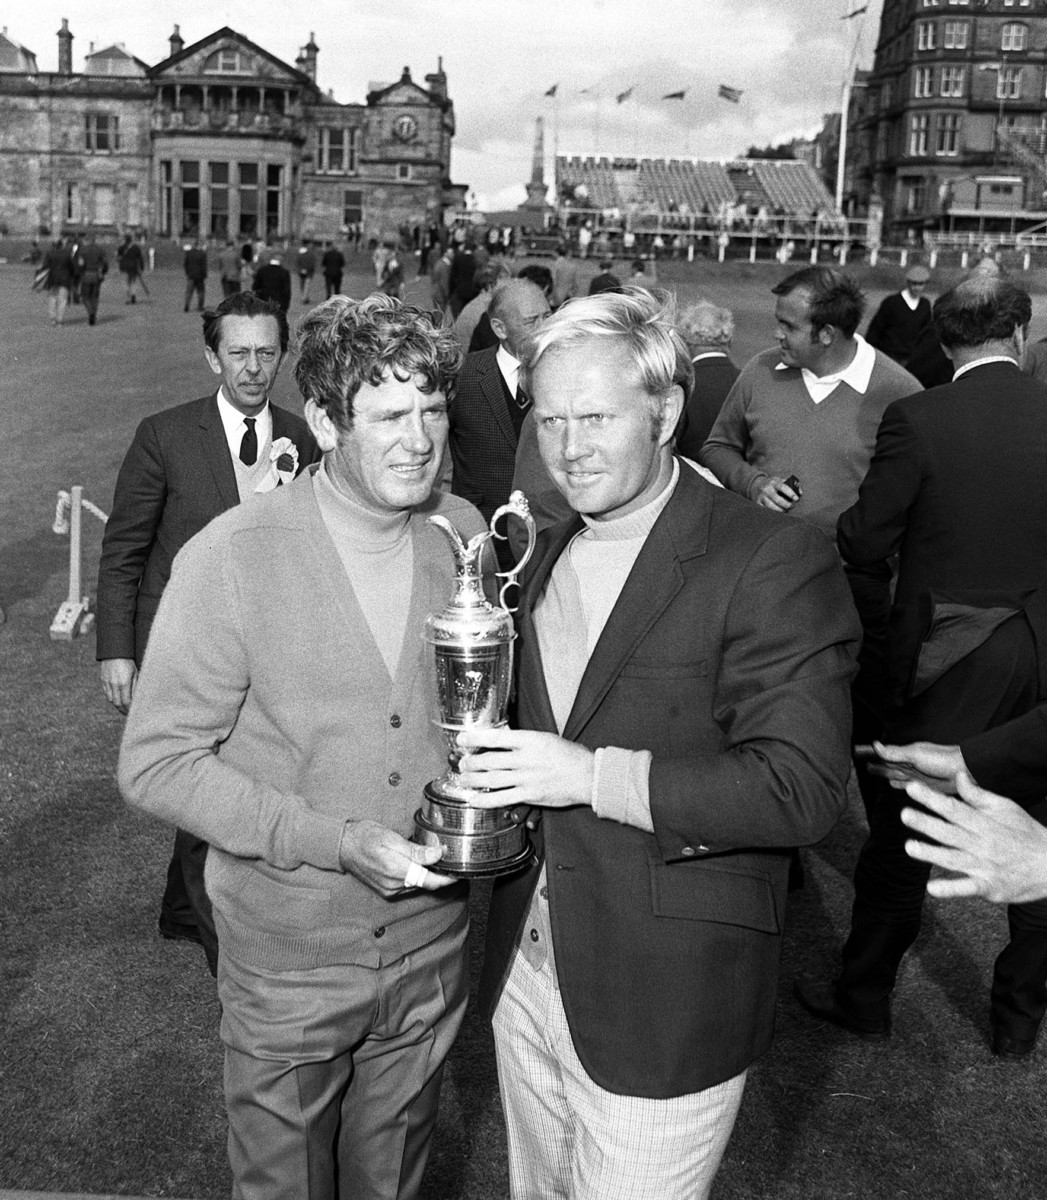 , Doug Sanders dead at 86: Golfer haunted by famous missed putt to win The Open against Jack Nicklaus in 1970 dies